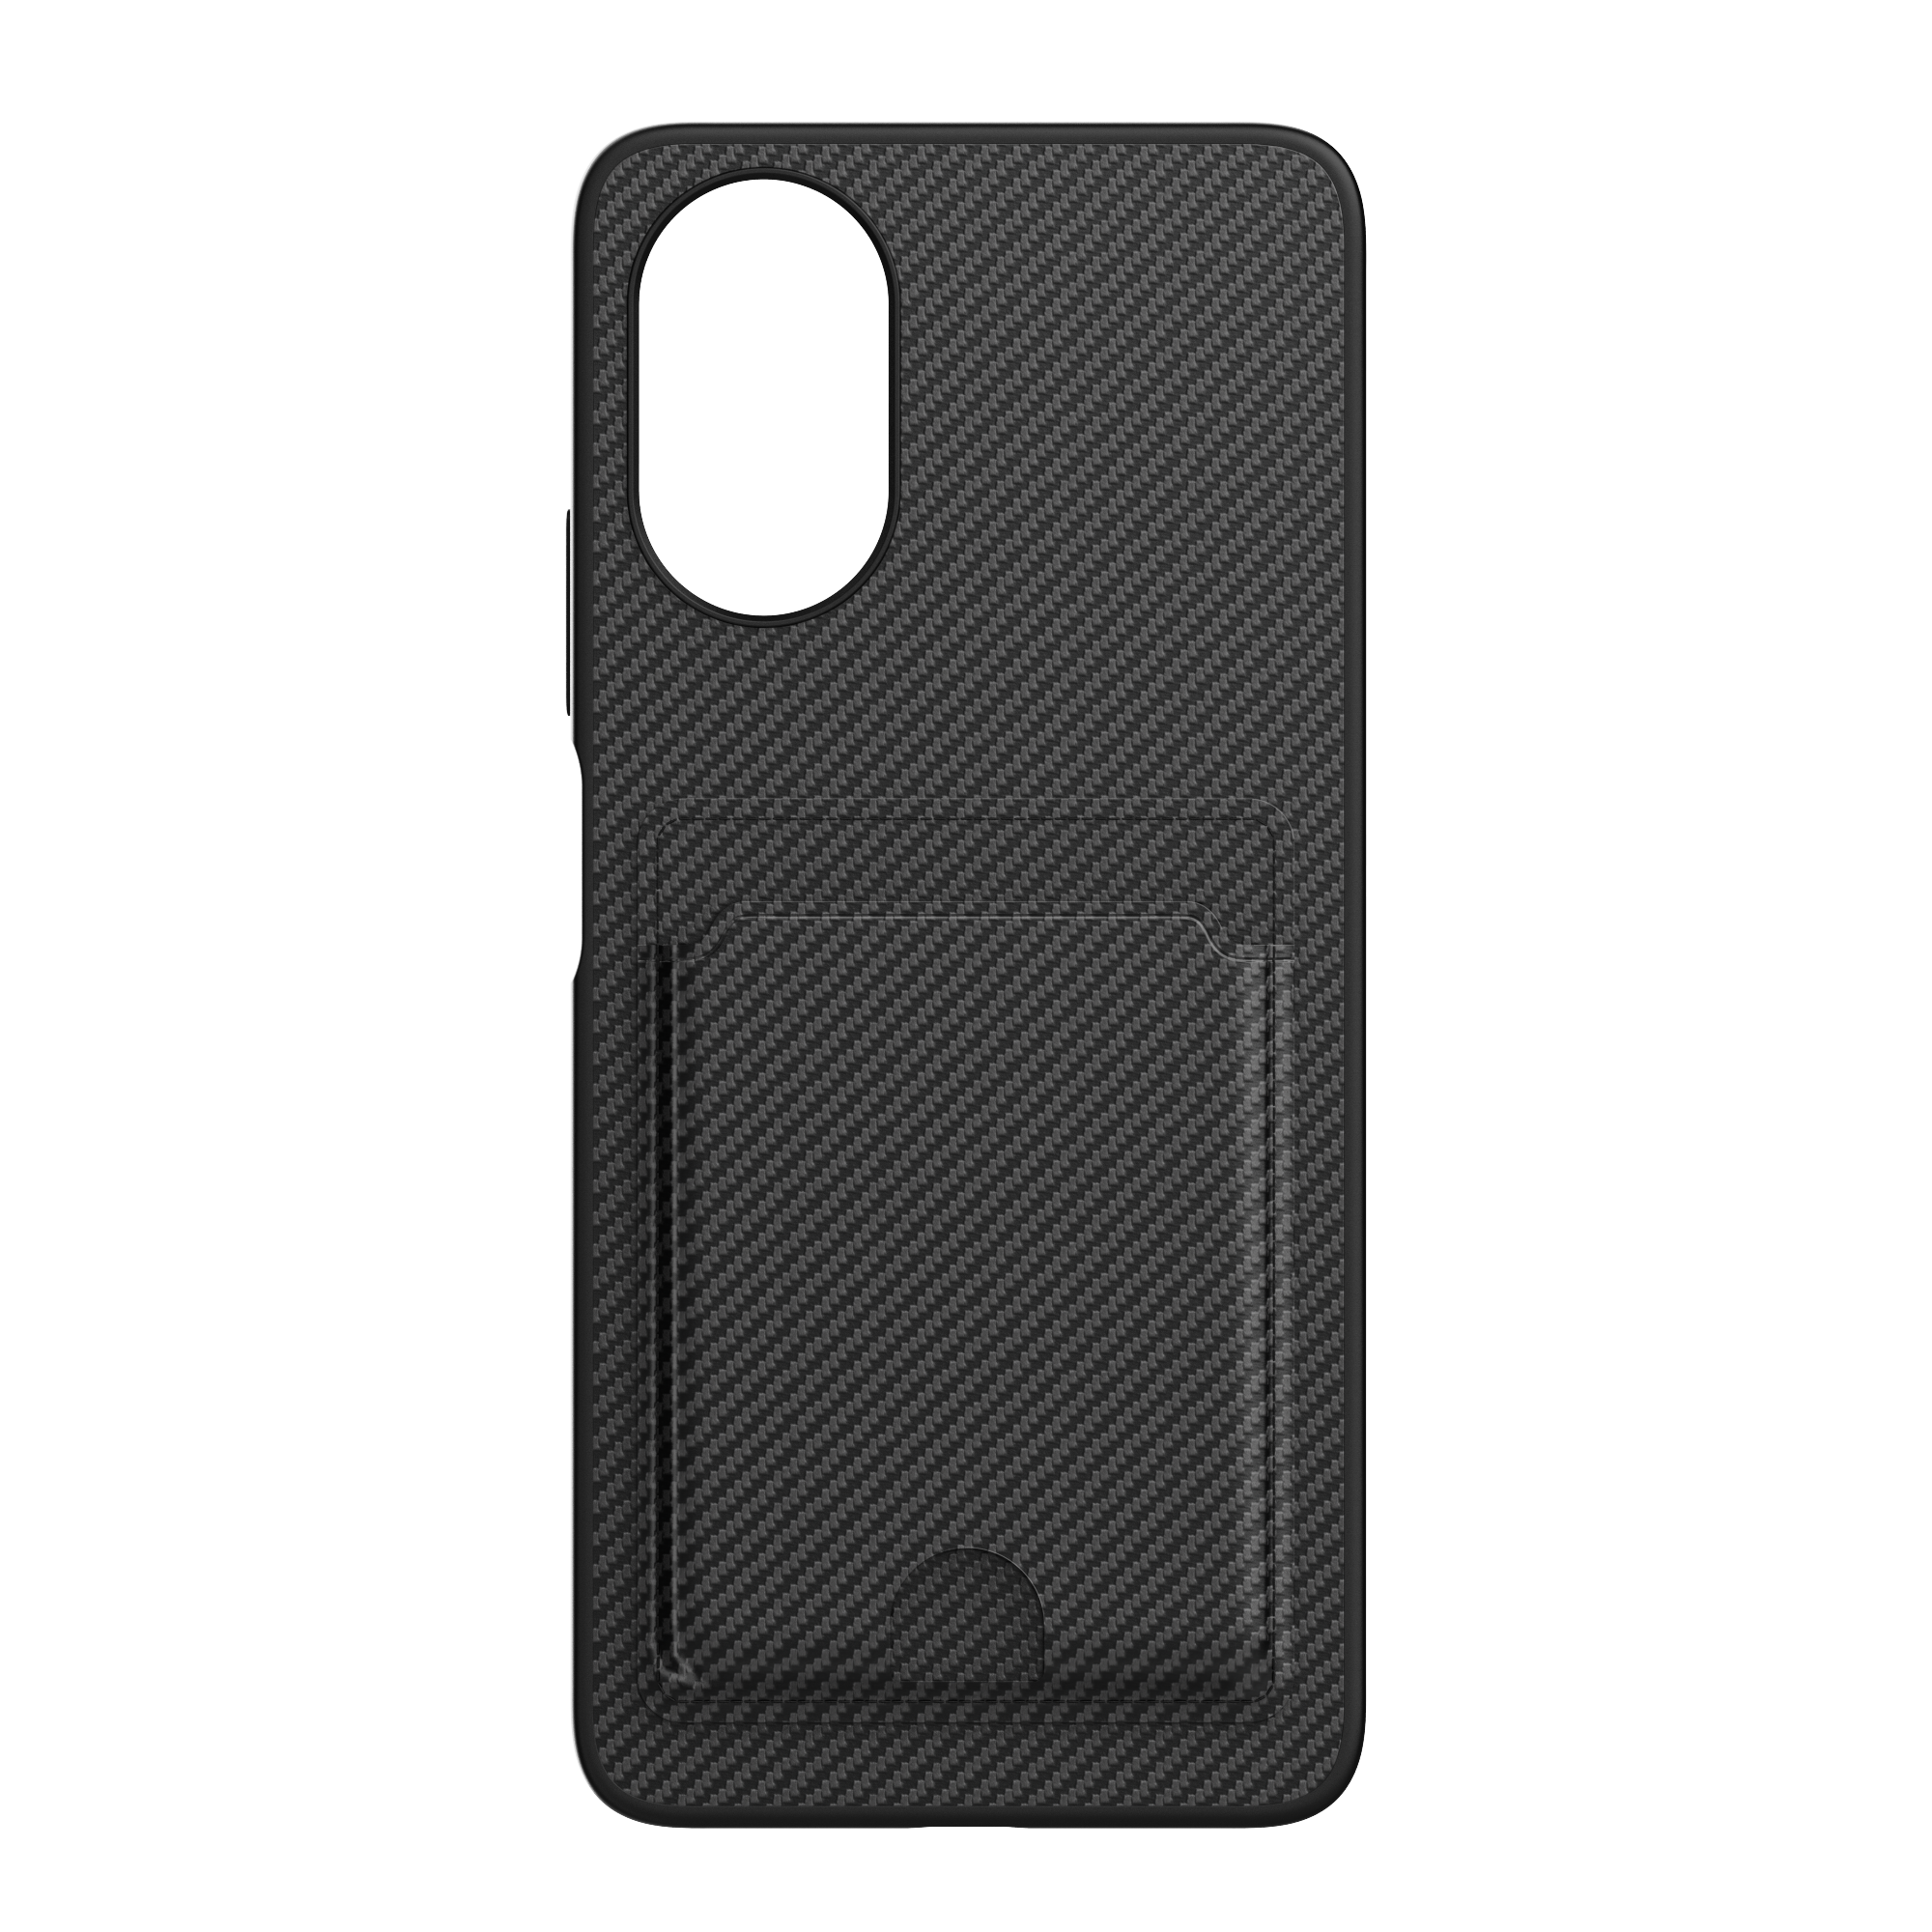 OPPO Official Hardshell Case with Card Slot A38 – Black - OPPO Official Store